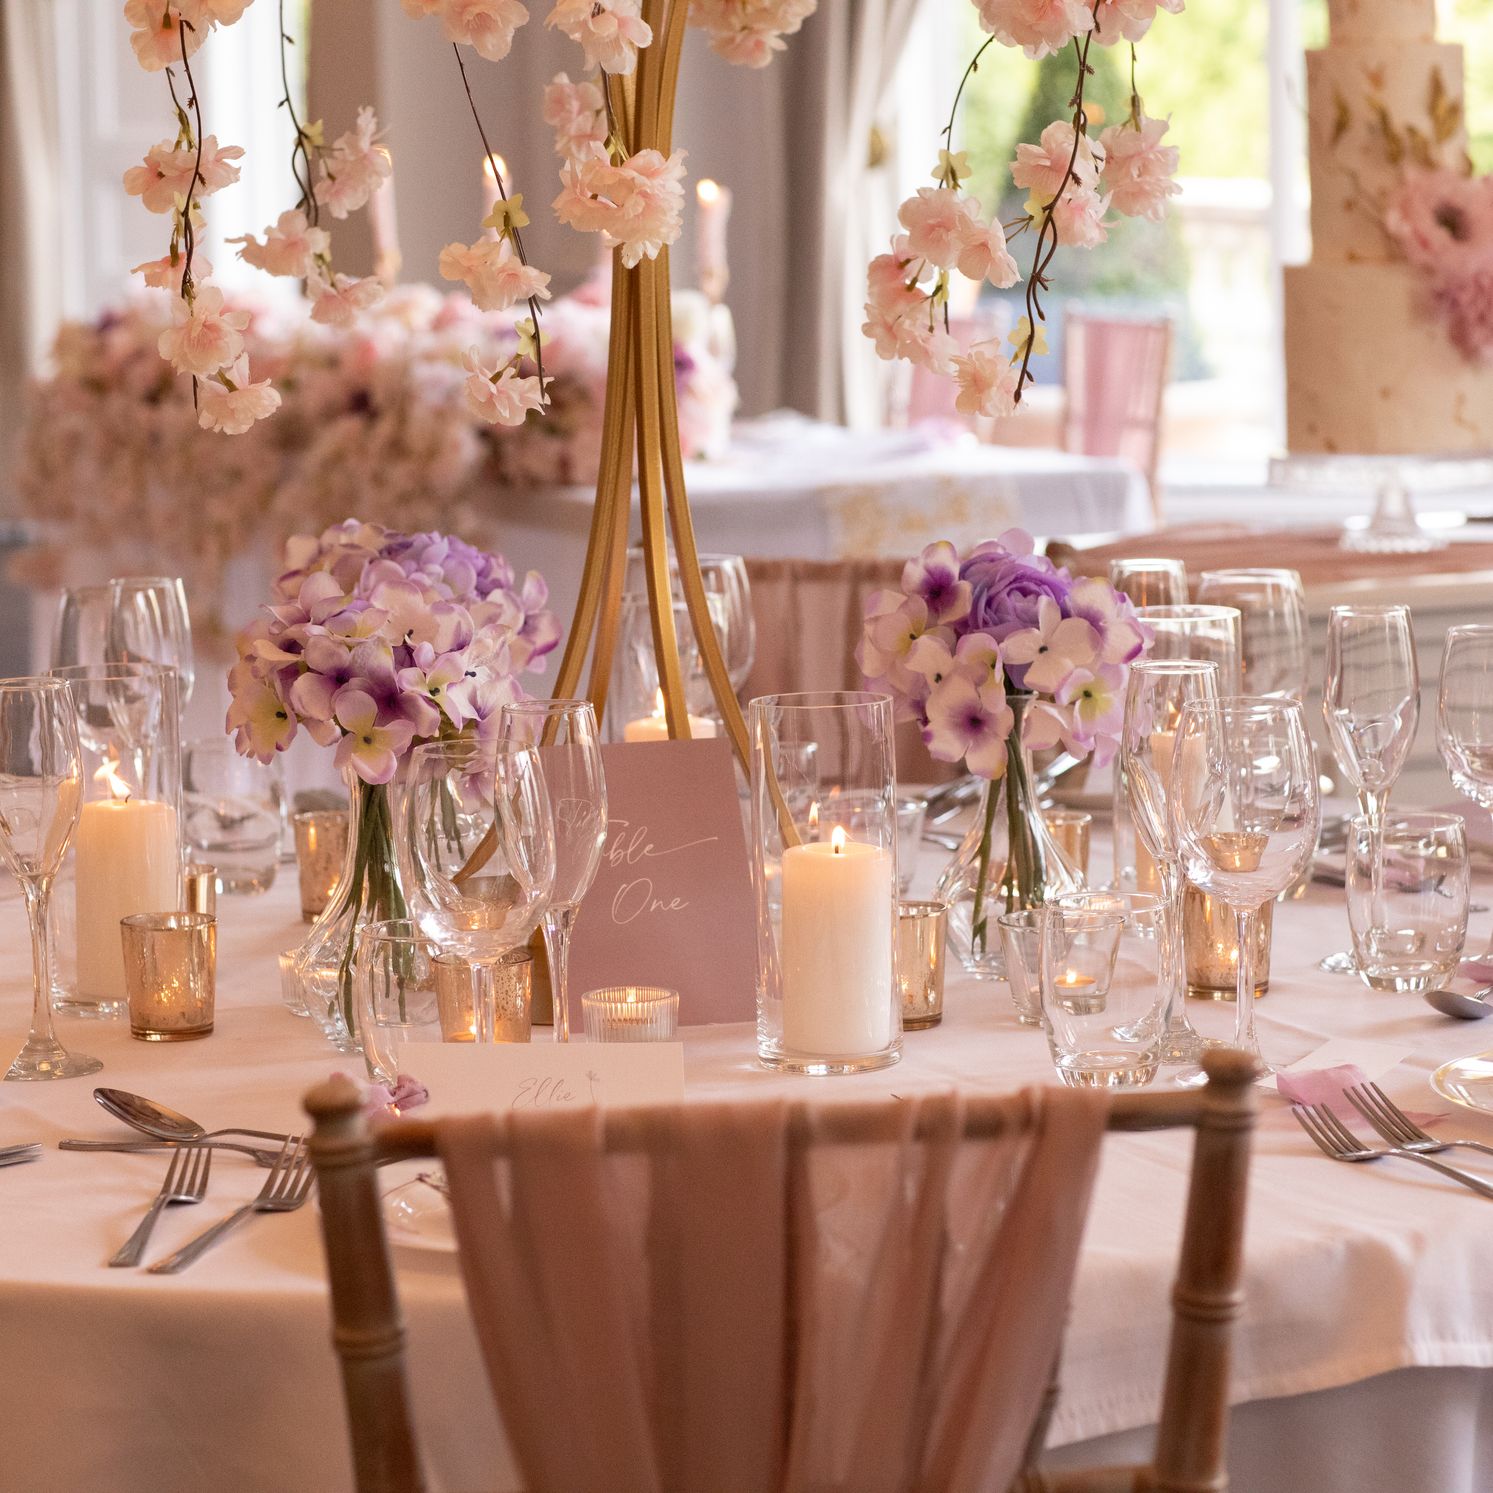 Pink wedding table decor and styling to hire in Cheshire & Manchester